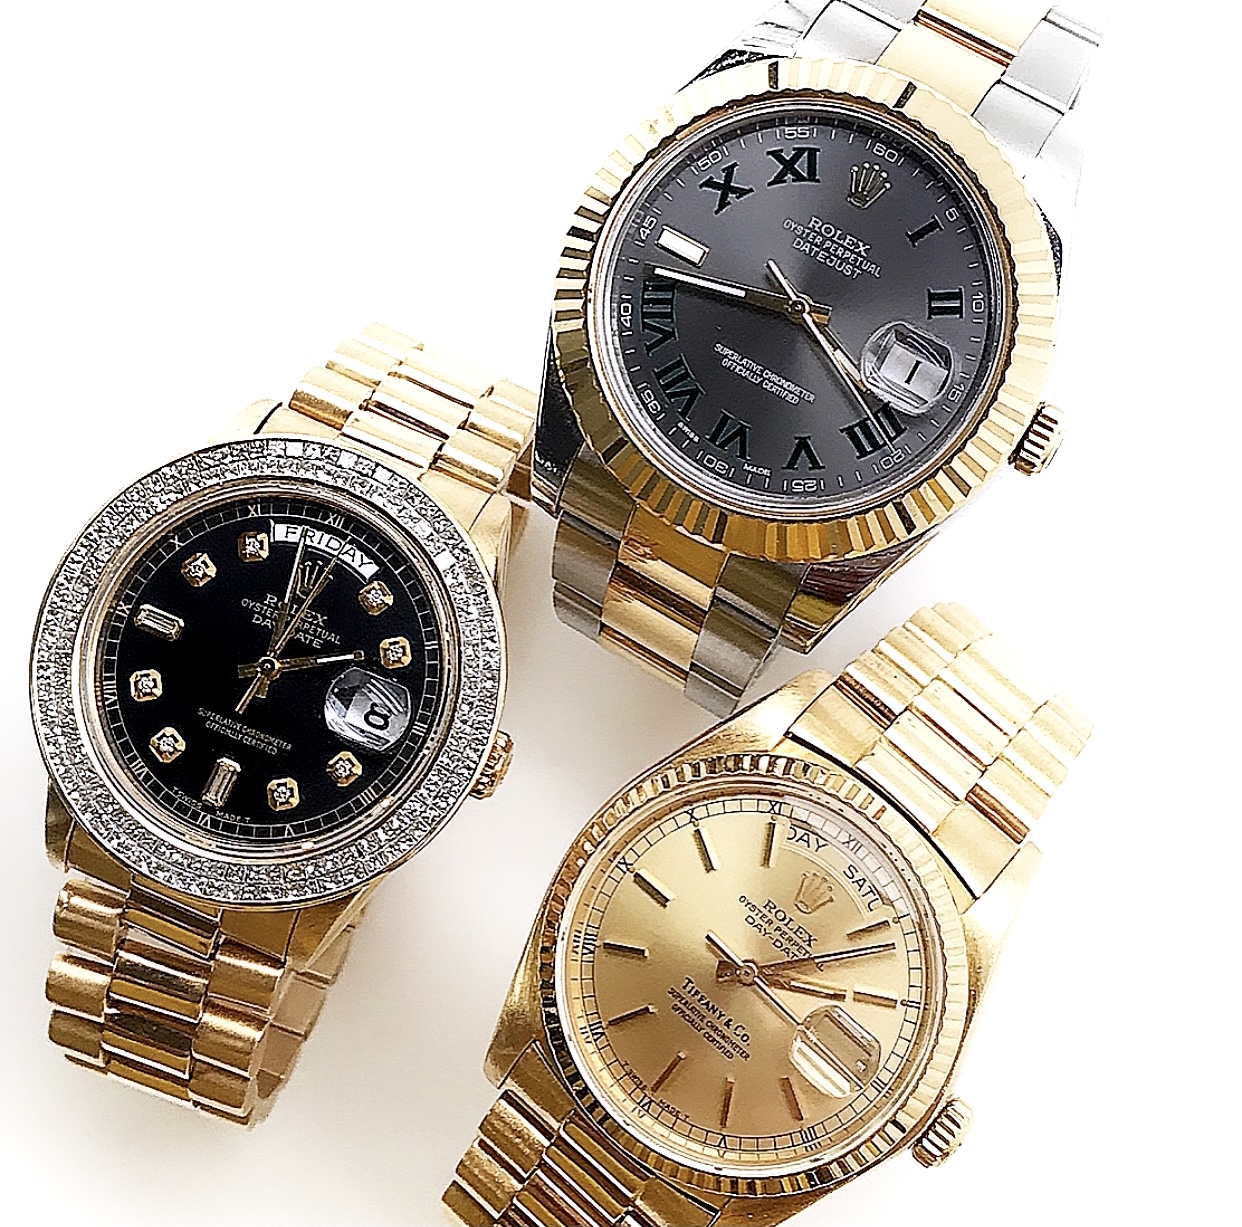 Professional and Expert watch buyers | Sell rolexes or any other, Our professional and experienced watch buyers are ready and available to get you the best prices for your used or new accessories, Arizona Chandler Gilbert Scottsdale Mesa Glendale Maricopa Tucson Casa Grande Payson Prescott Flagstaff Cave Creek Sun City AZ, rolex watch buyers and more